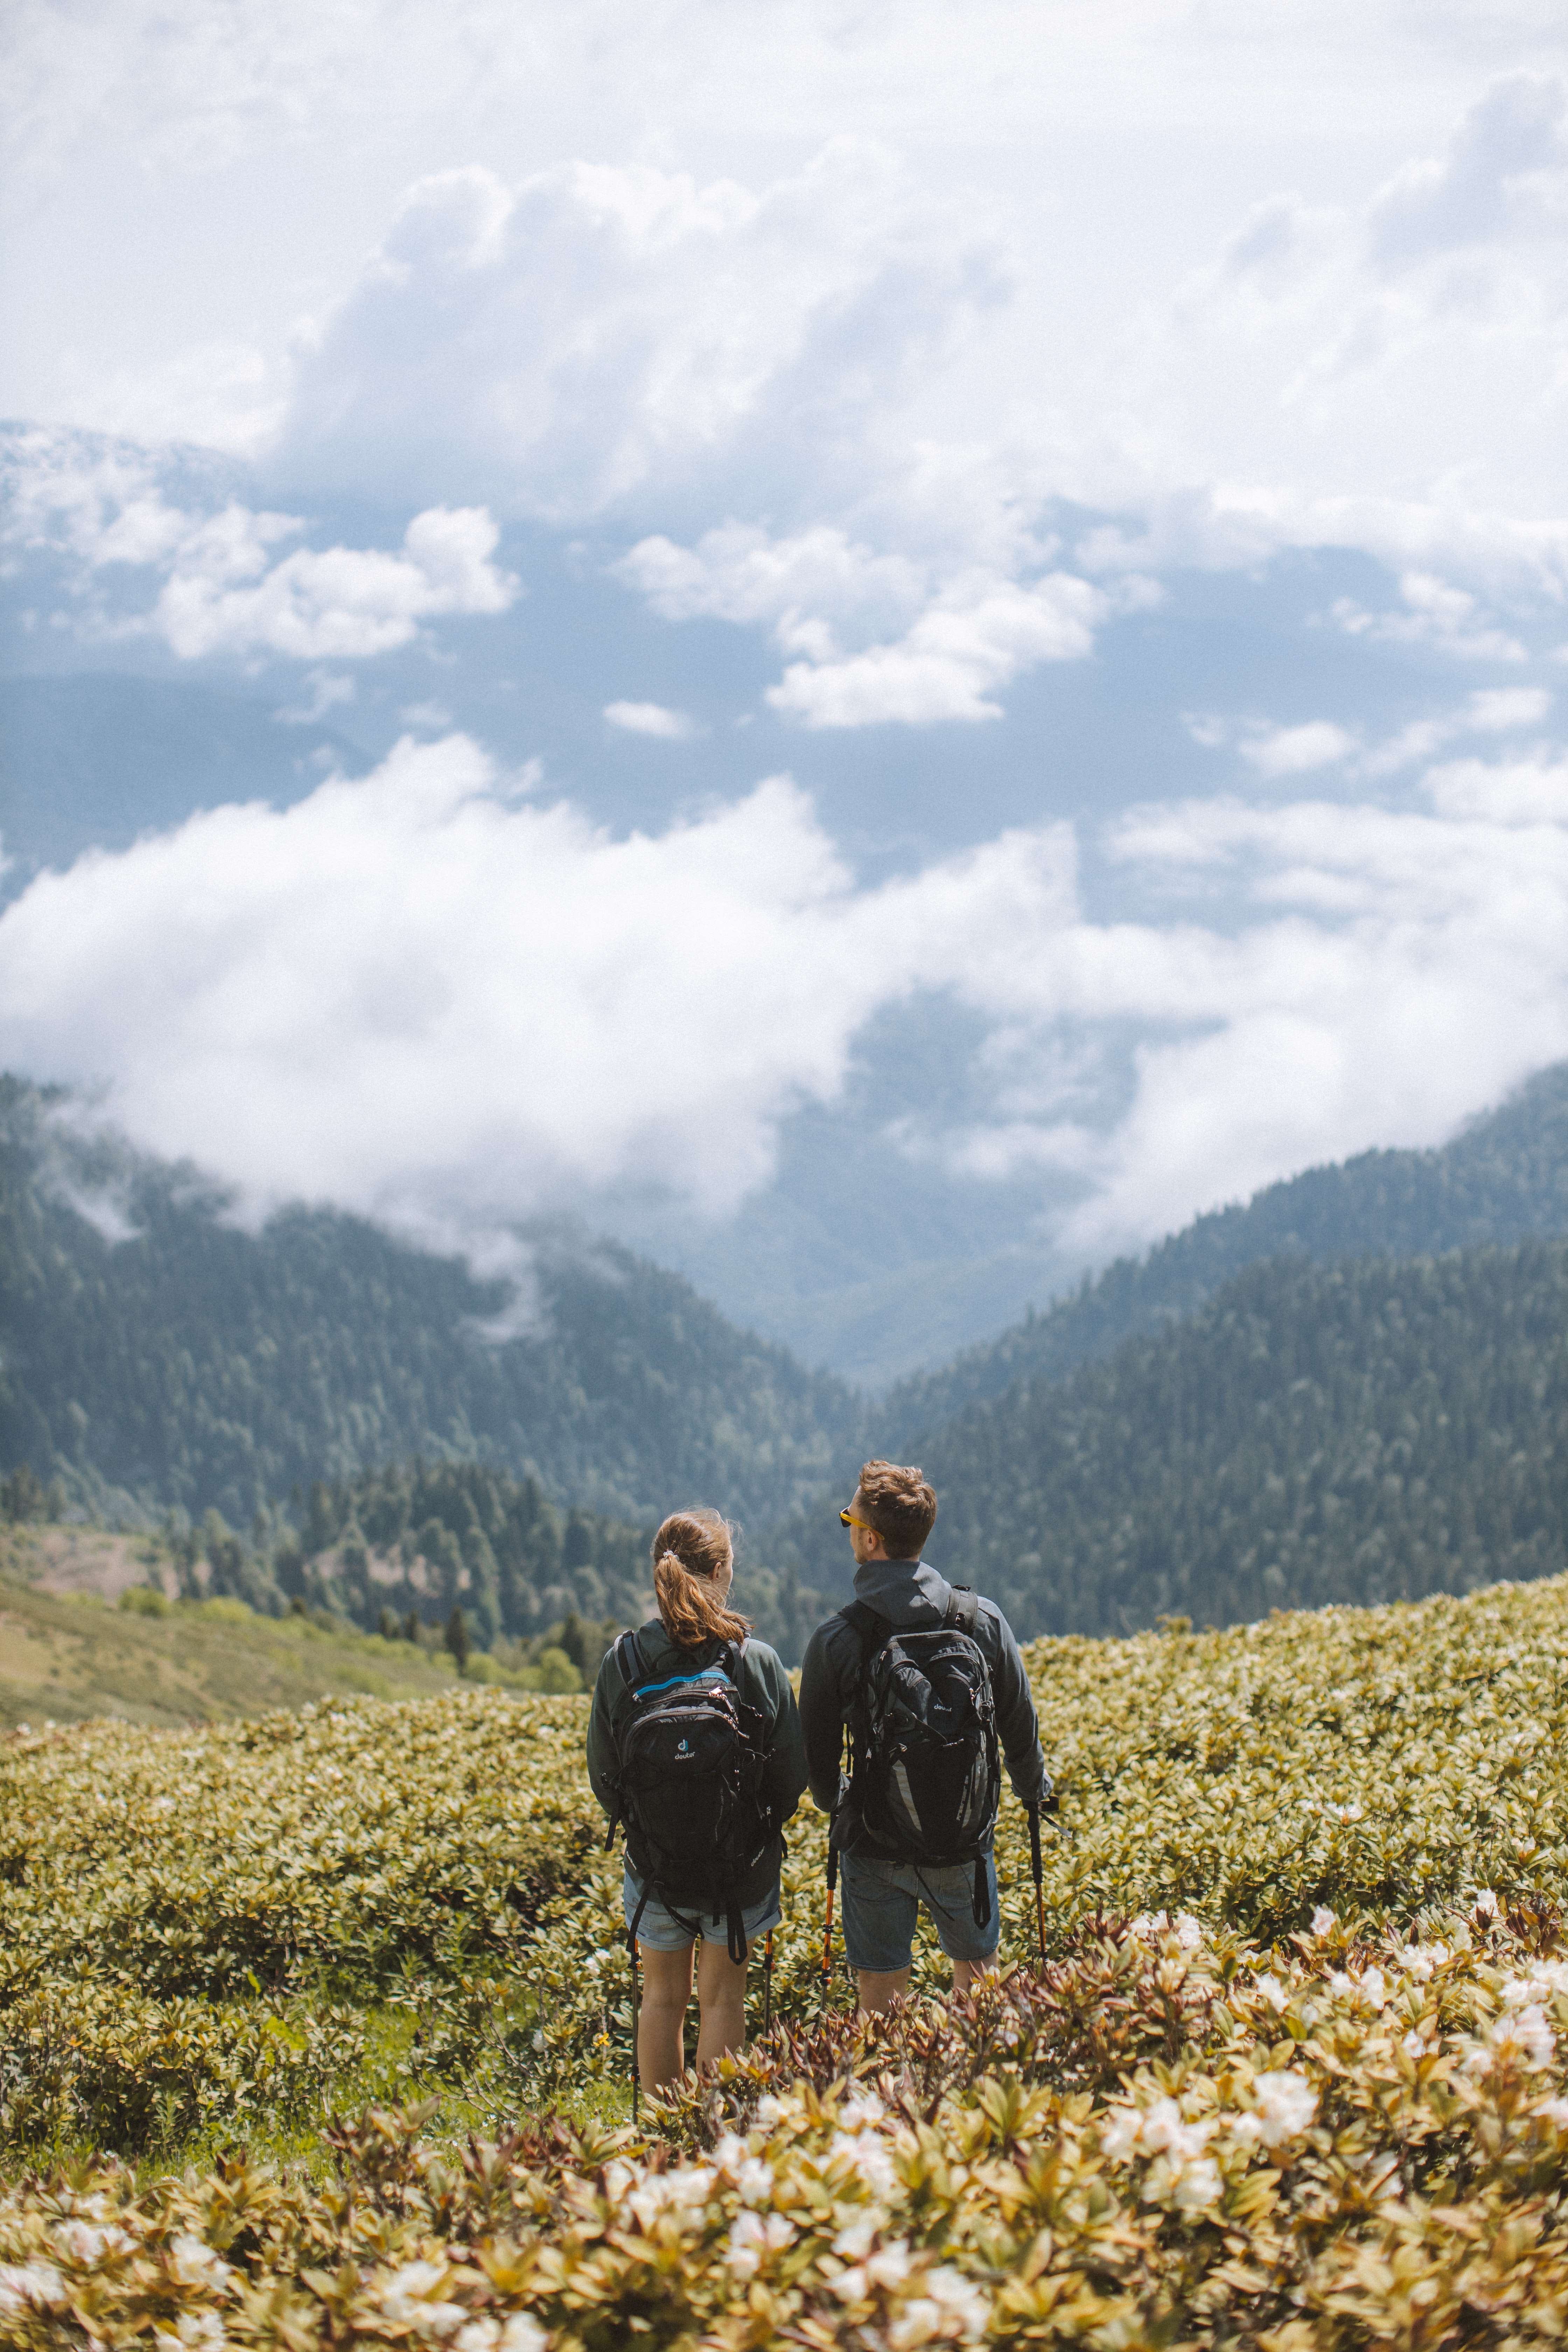 A couple hiking together. | Source: Pexels